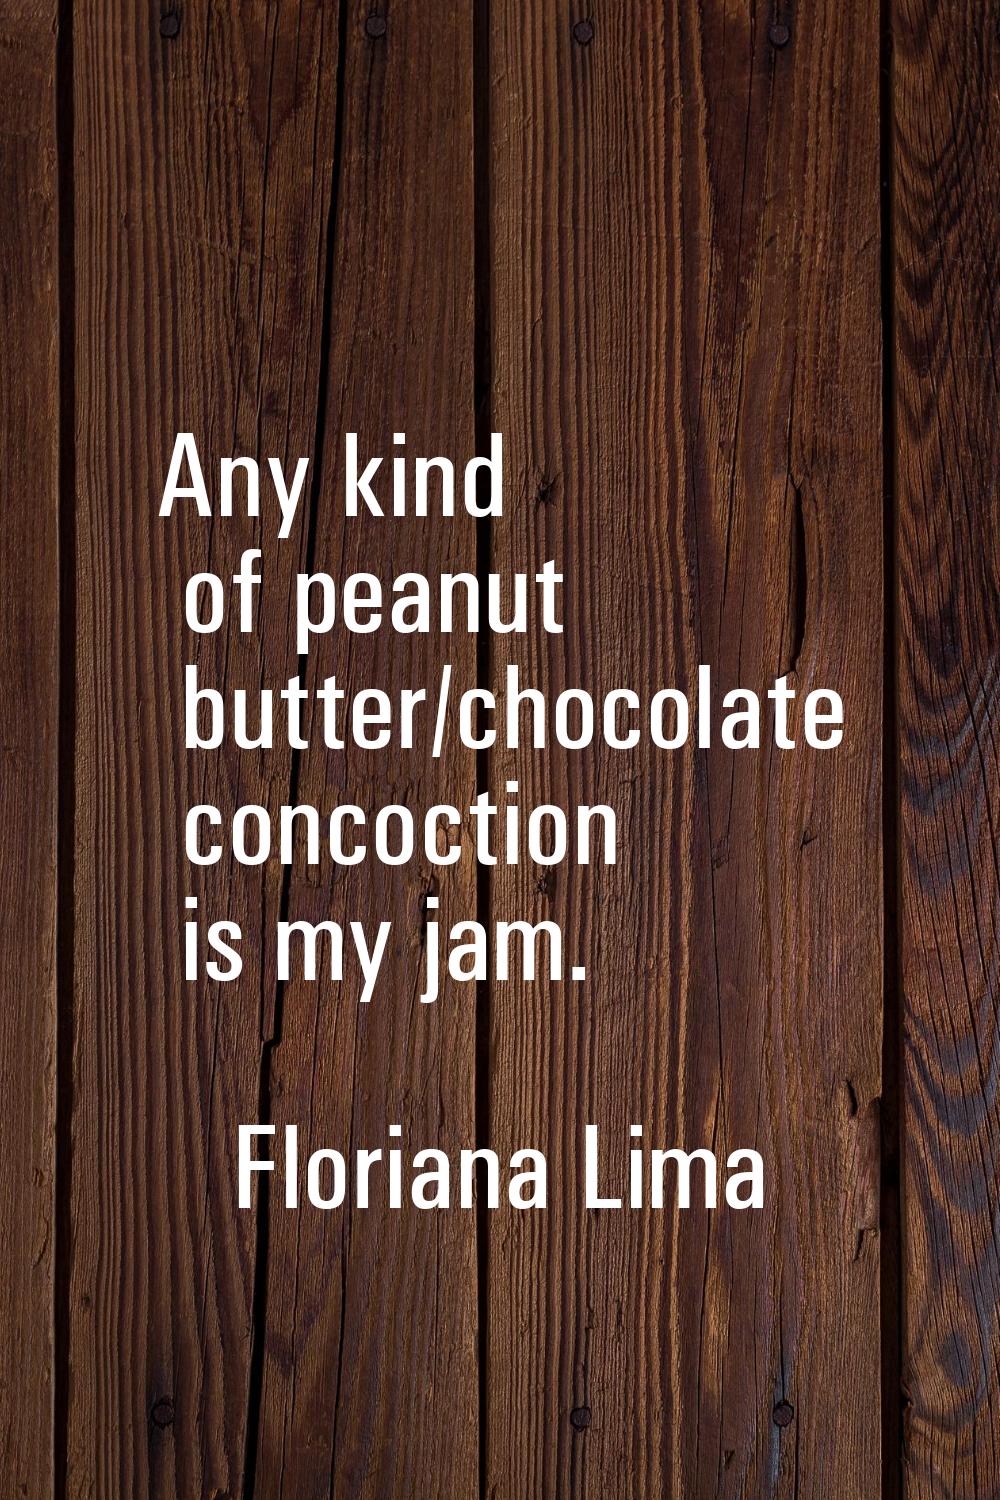 Any kind of peanut butter/chocolate concoction is my jam.